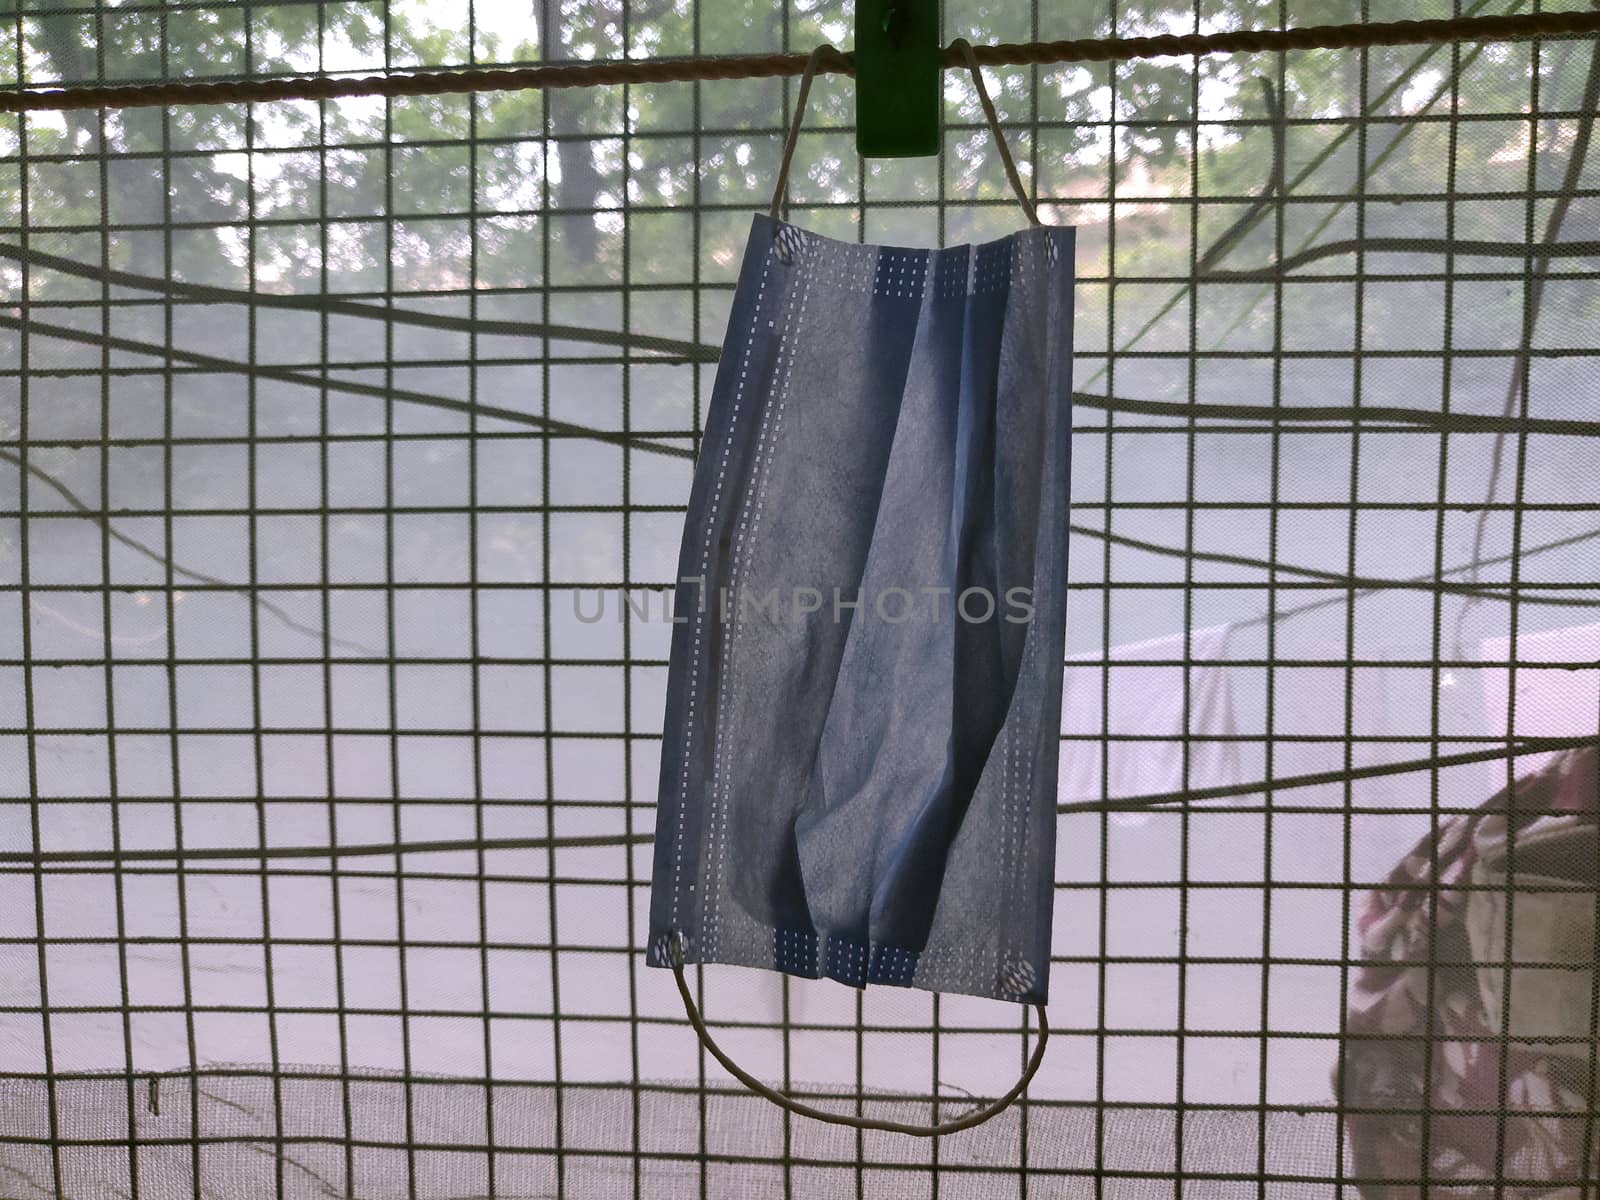 A surgical mask hanging by clothes pin near a grilled window during lock down in India